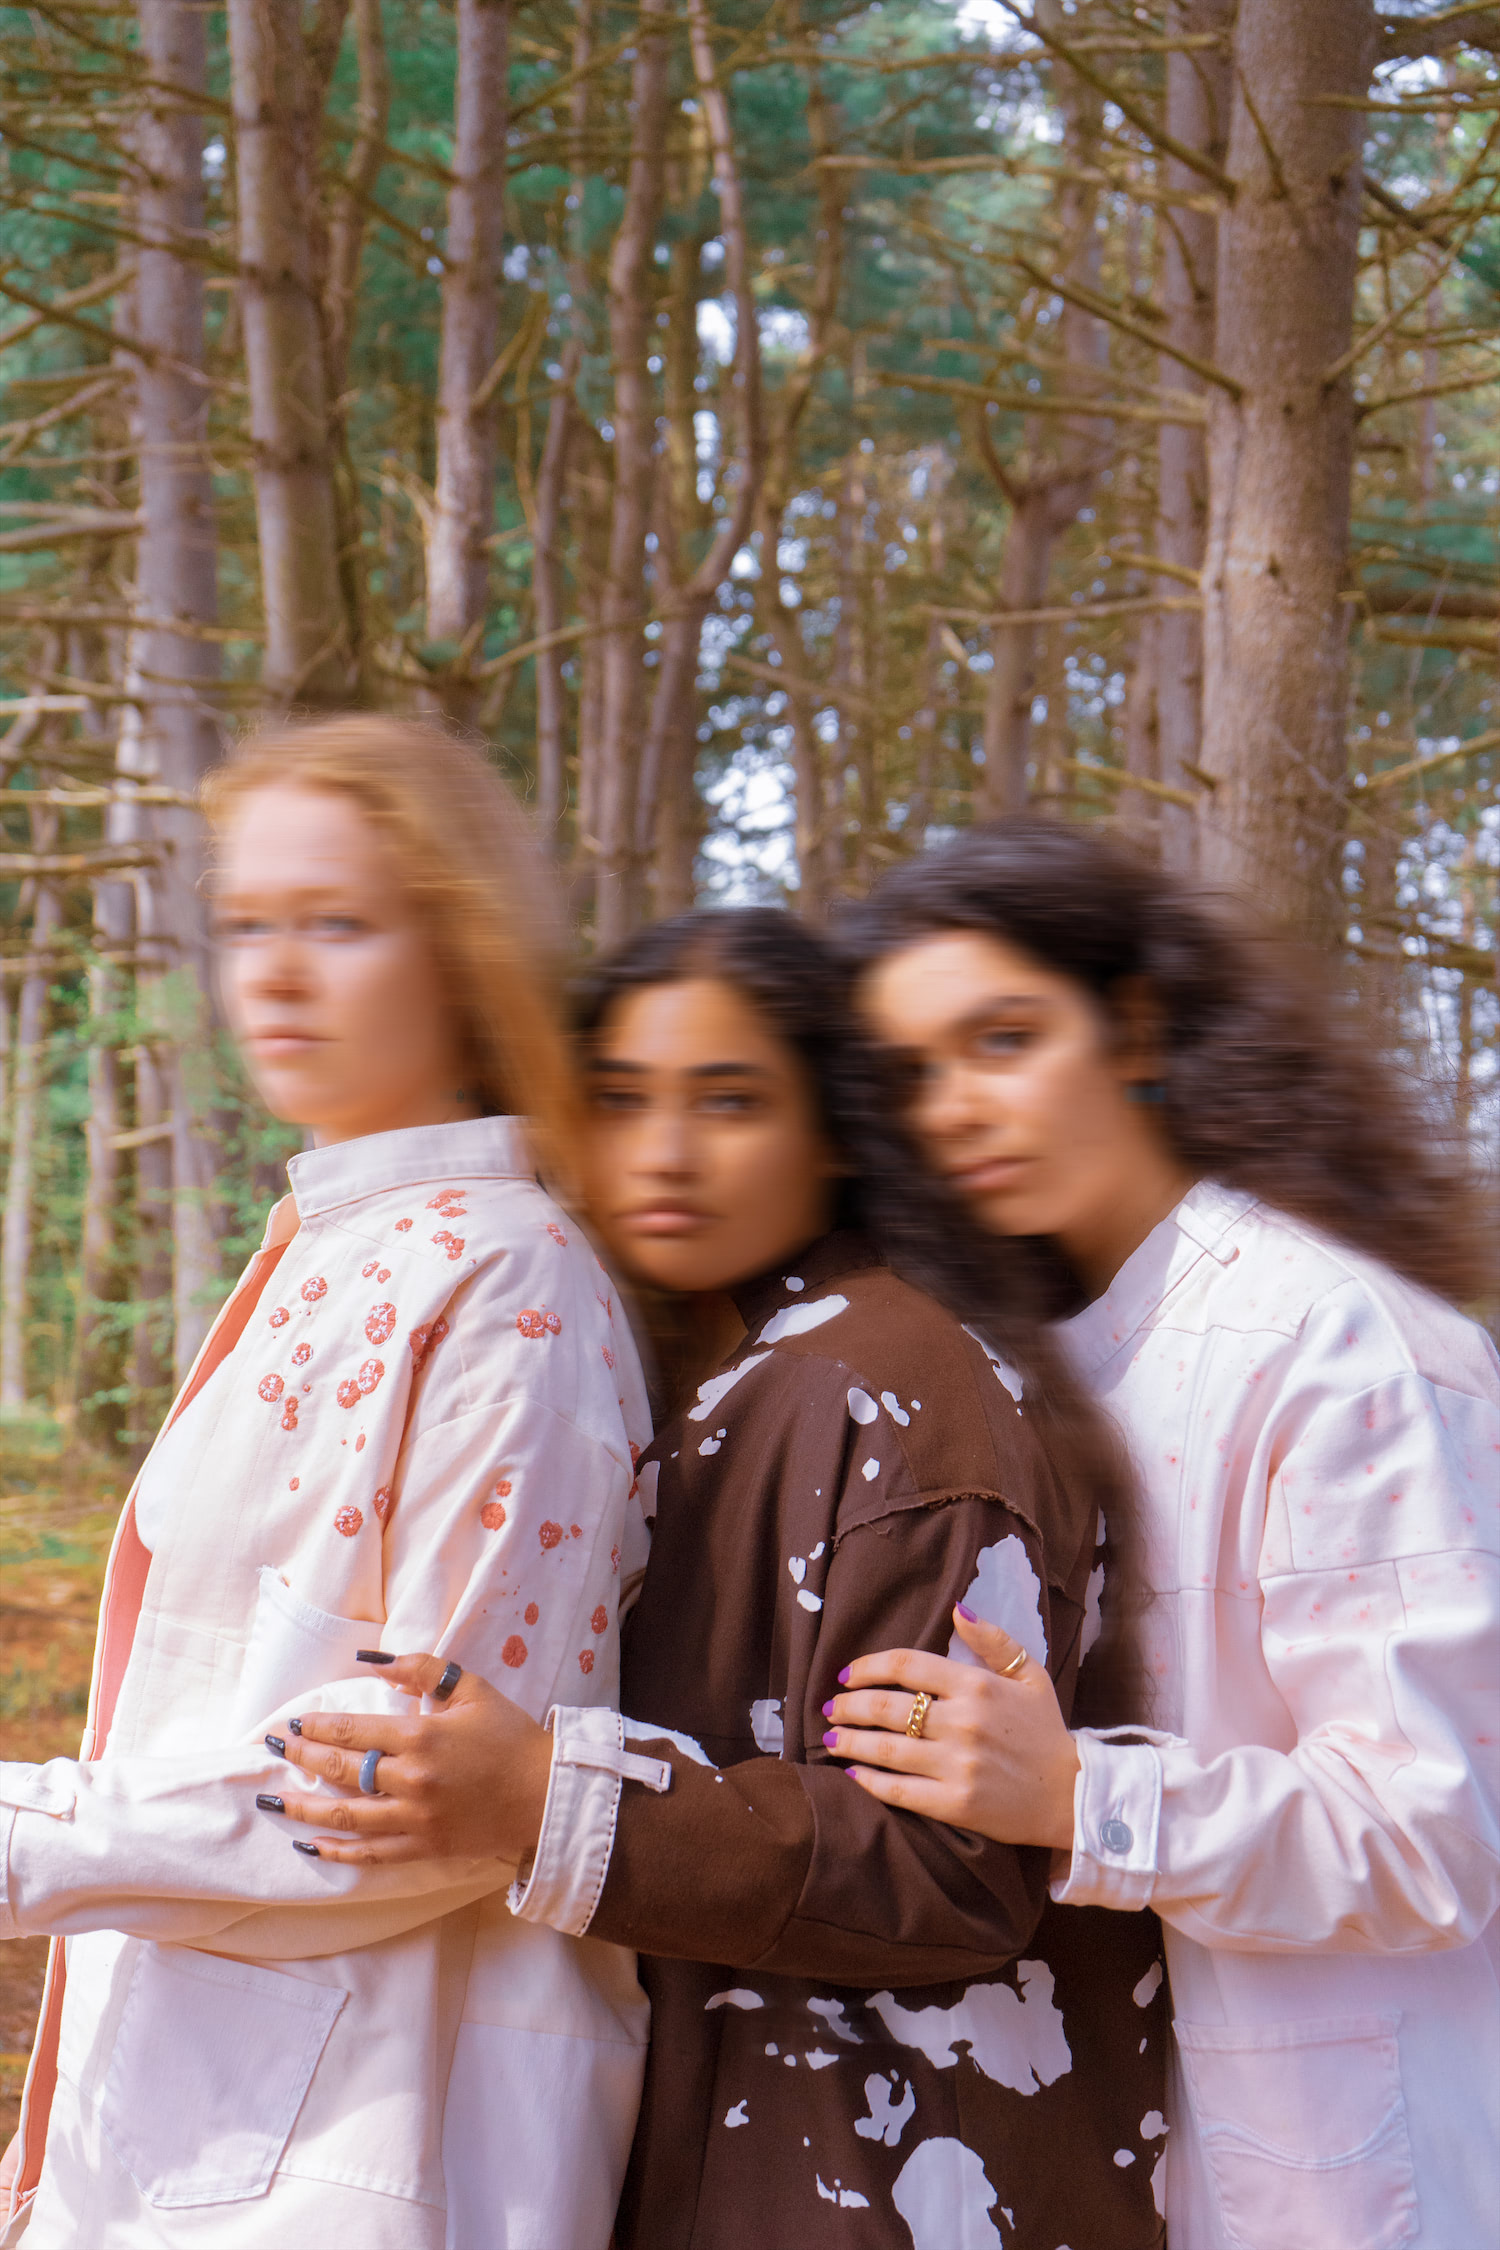 Three models wearing hand stitched jackets, leaning on each other and looking toward the camera.